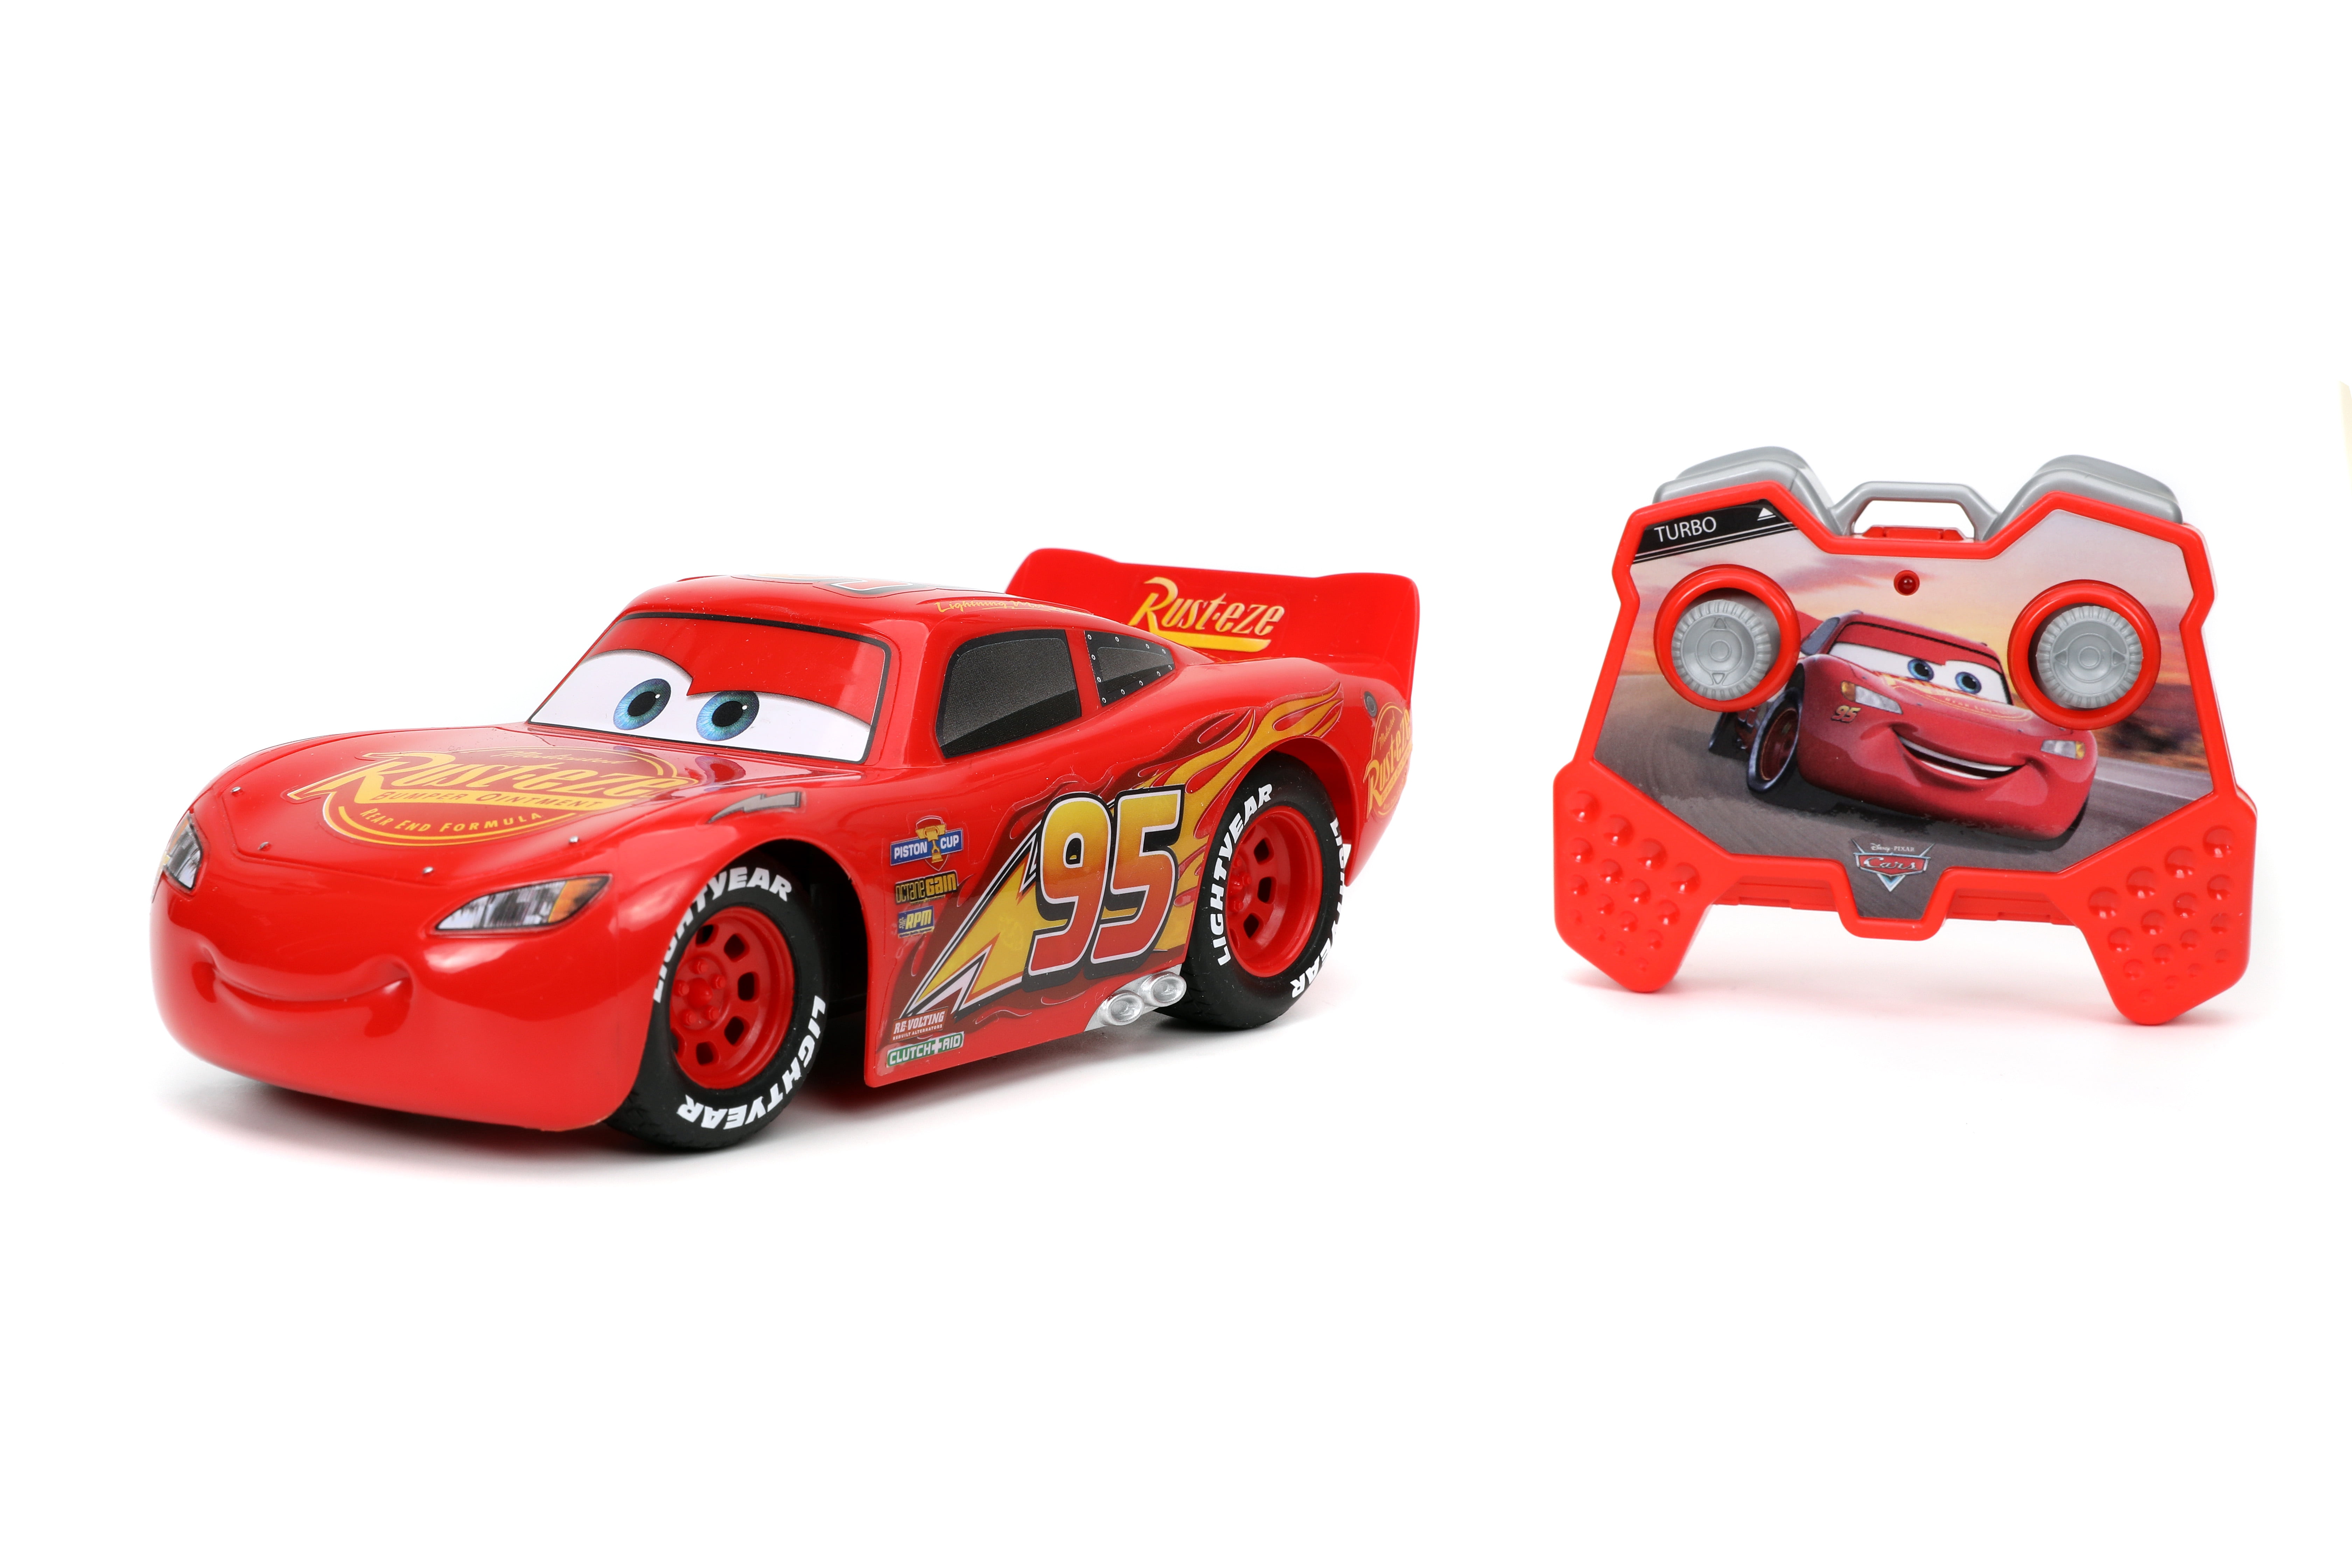 New and used Disney Pixar Cars Lightning McQueen Character Toys for sale